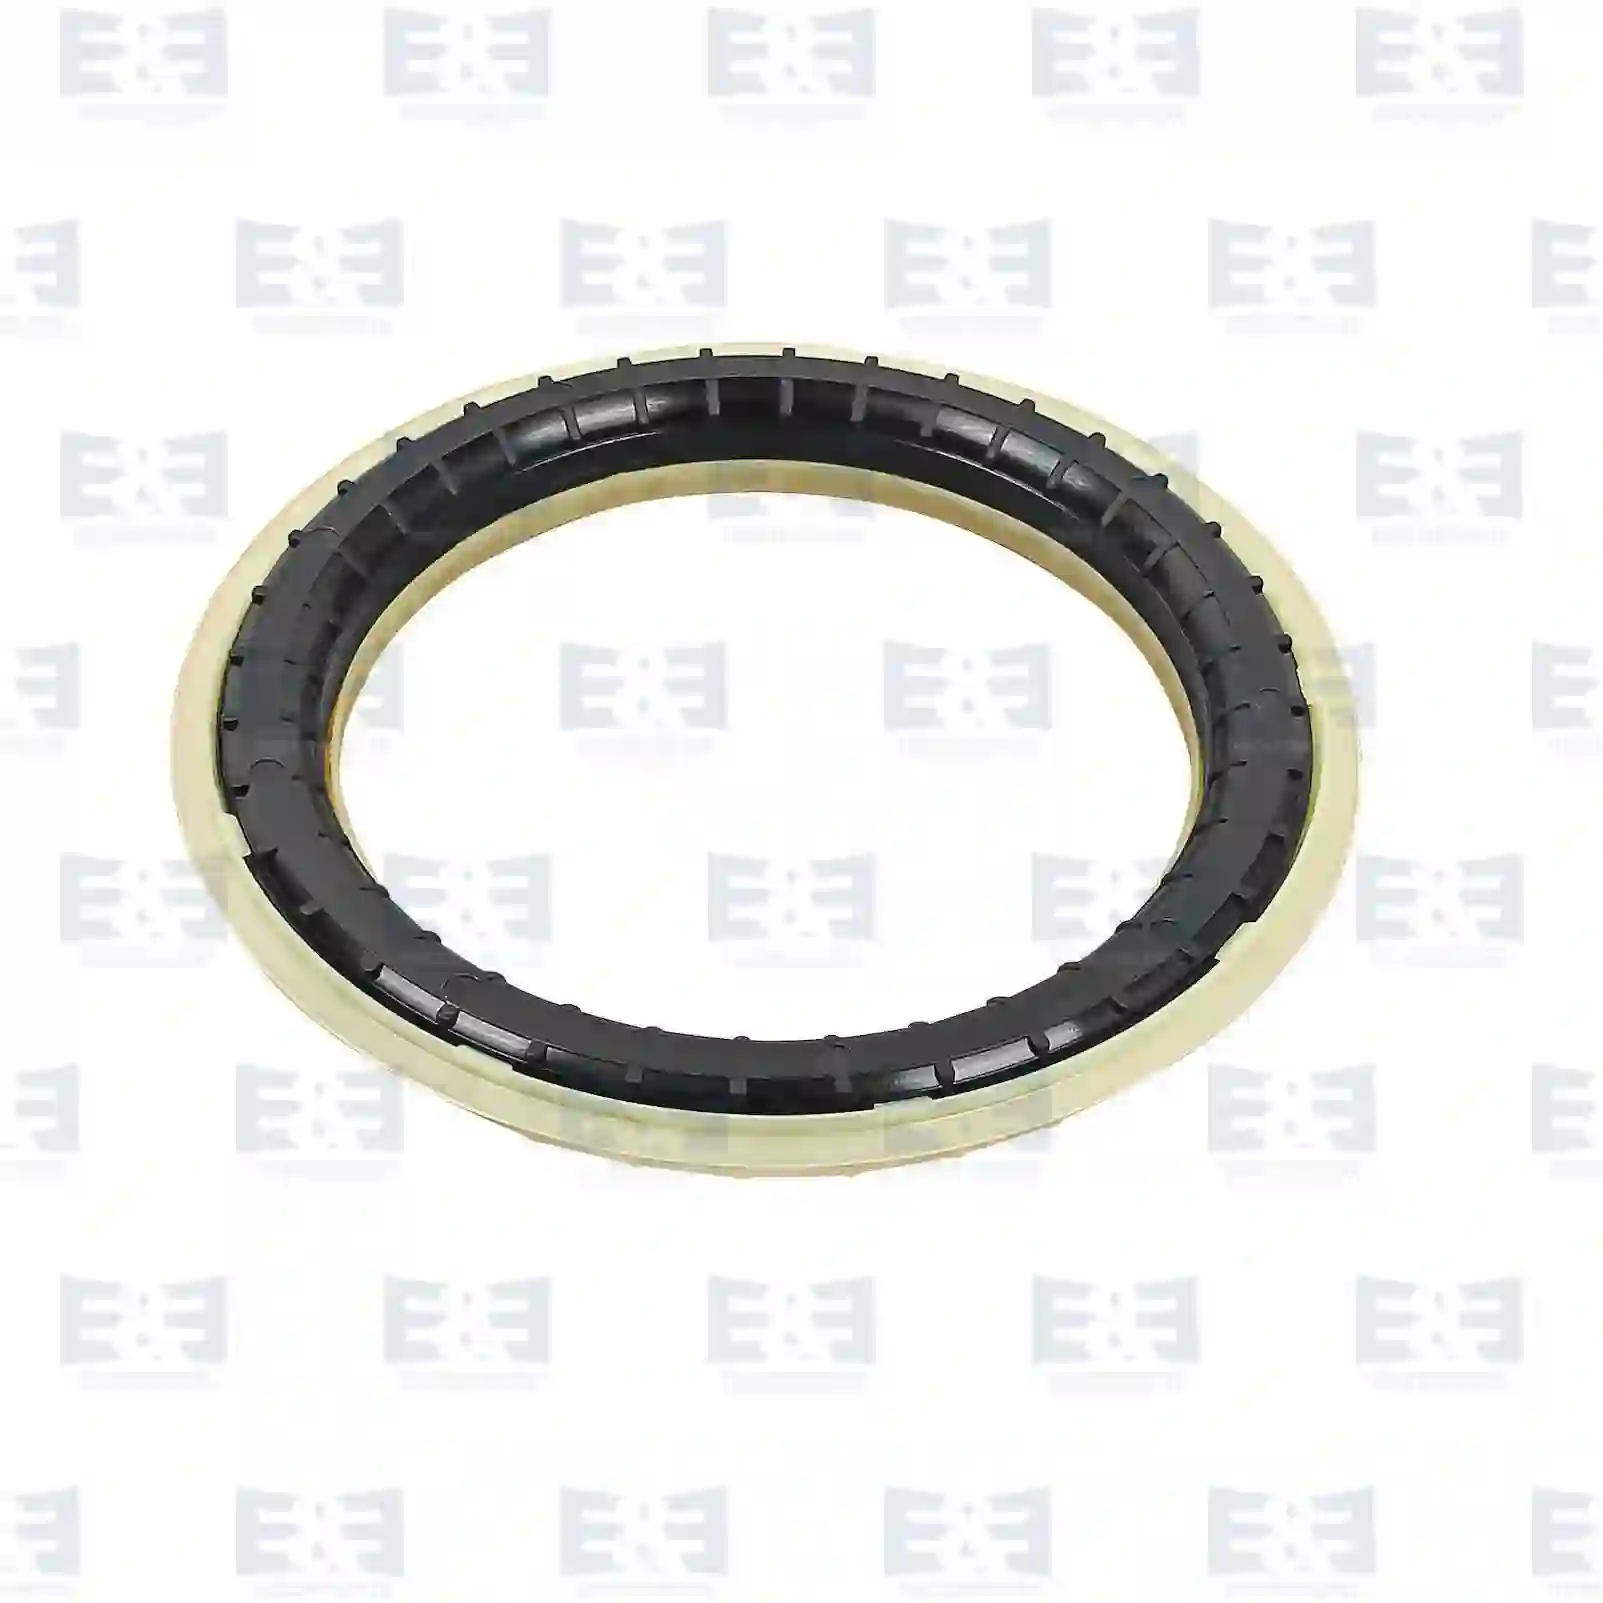 Shock Absorber Bearing, shock absorber, EE No 2E2281037 ,  oem no:1023332, 1051724, 1078730, 1103725, 4094373, 6735956, 98BG-3K099-AC, YC15-3K099-AA, 30616825 E&E Truck Spare Parts | Truck Spare Parts, Auotomotive Spare Parts